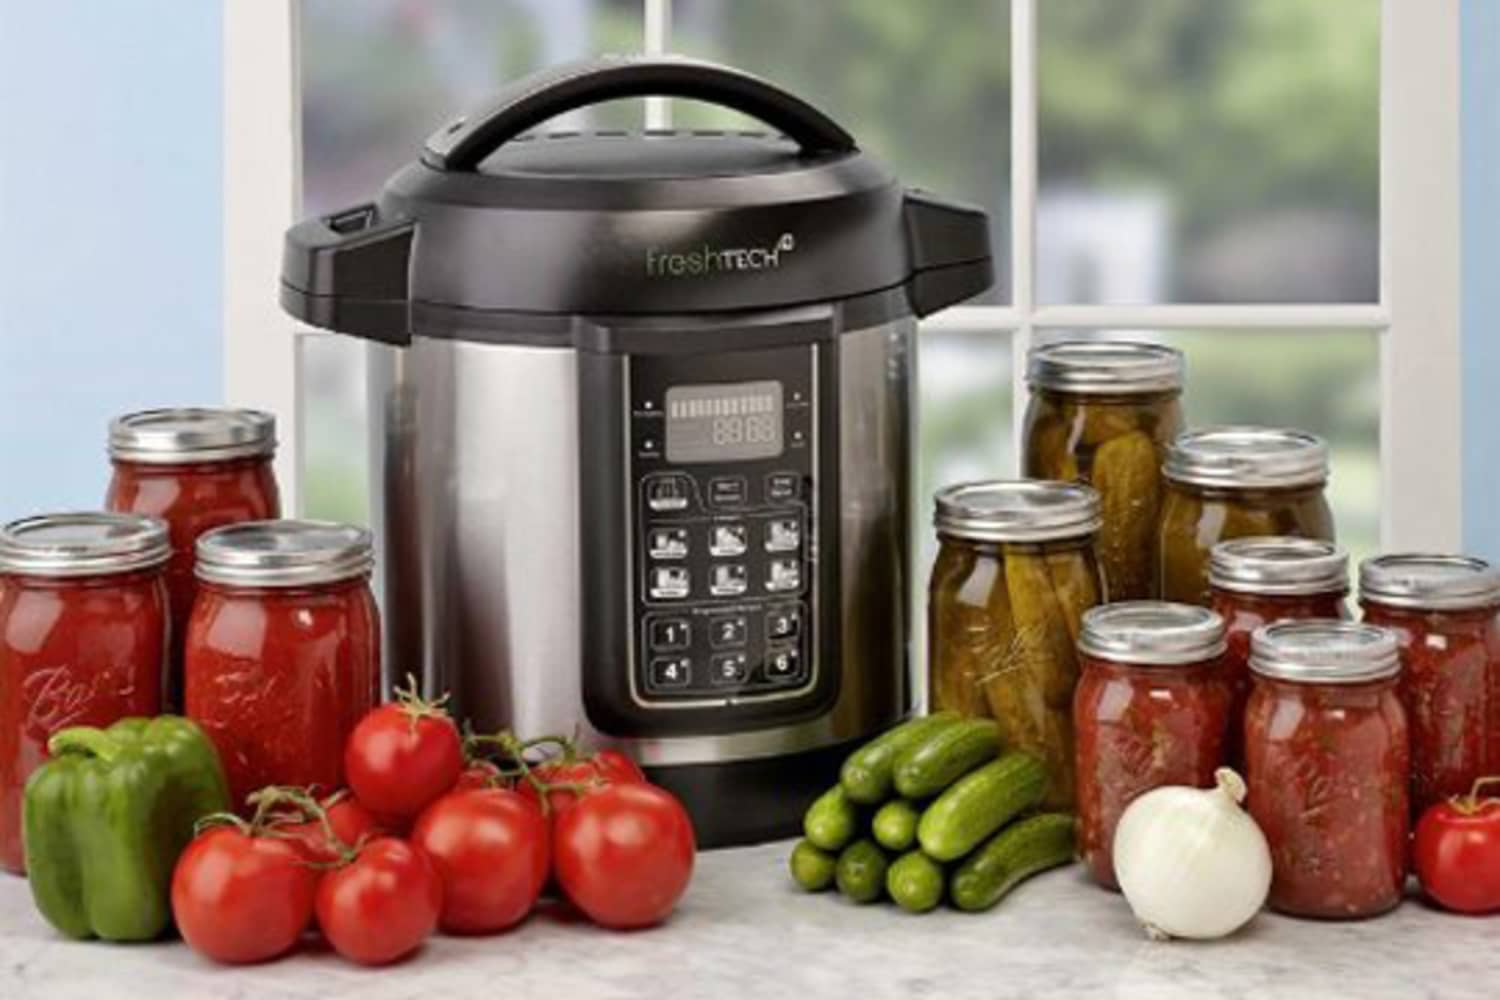 Pressure Cookers versus Pressure Canners - Healthy Canning in Partnership  with Canning for beginners, safely by the book